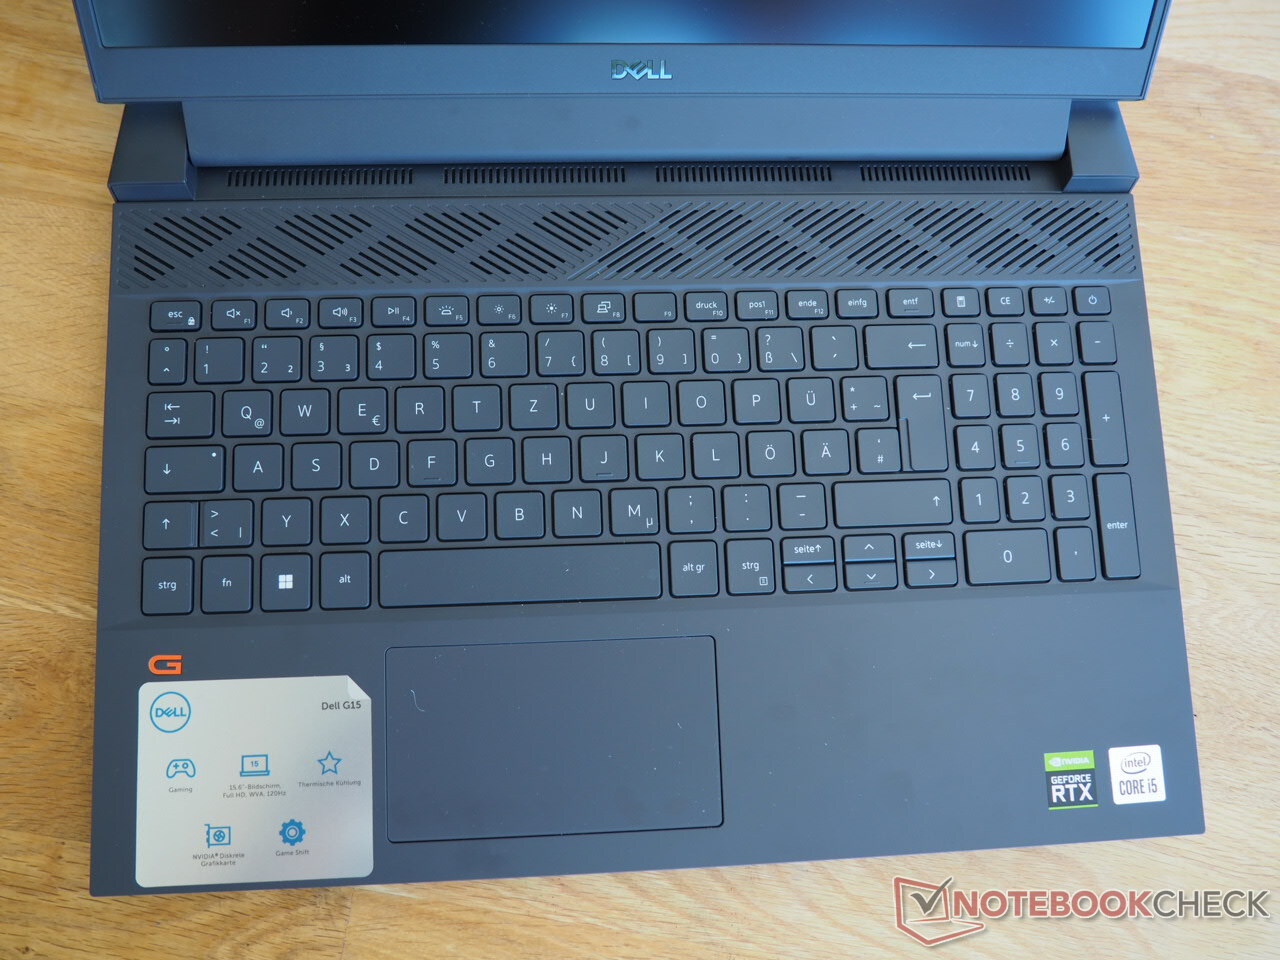 Dell G15 5510 laptop review: Budget gaming laptop with the RTX